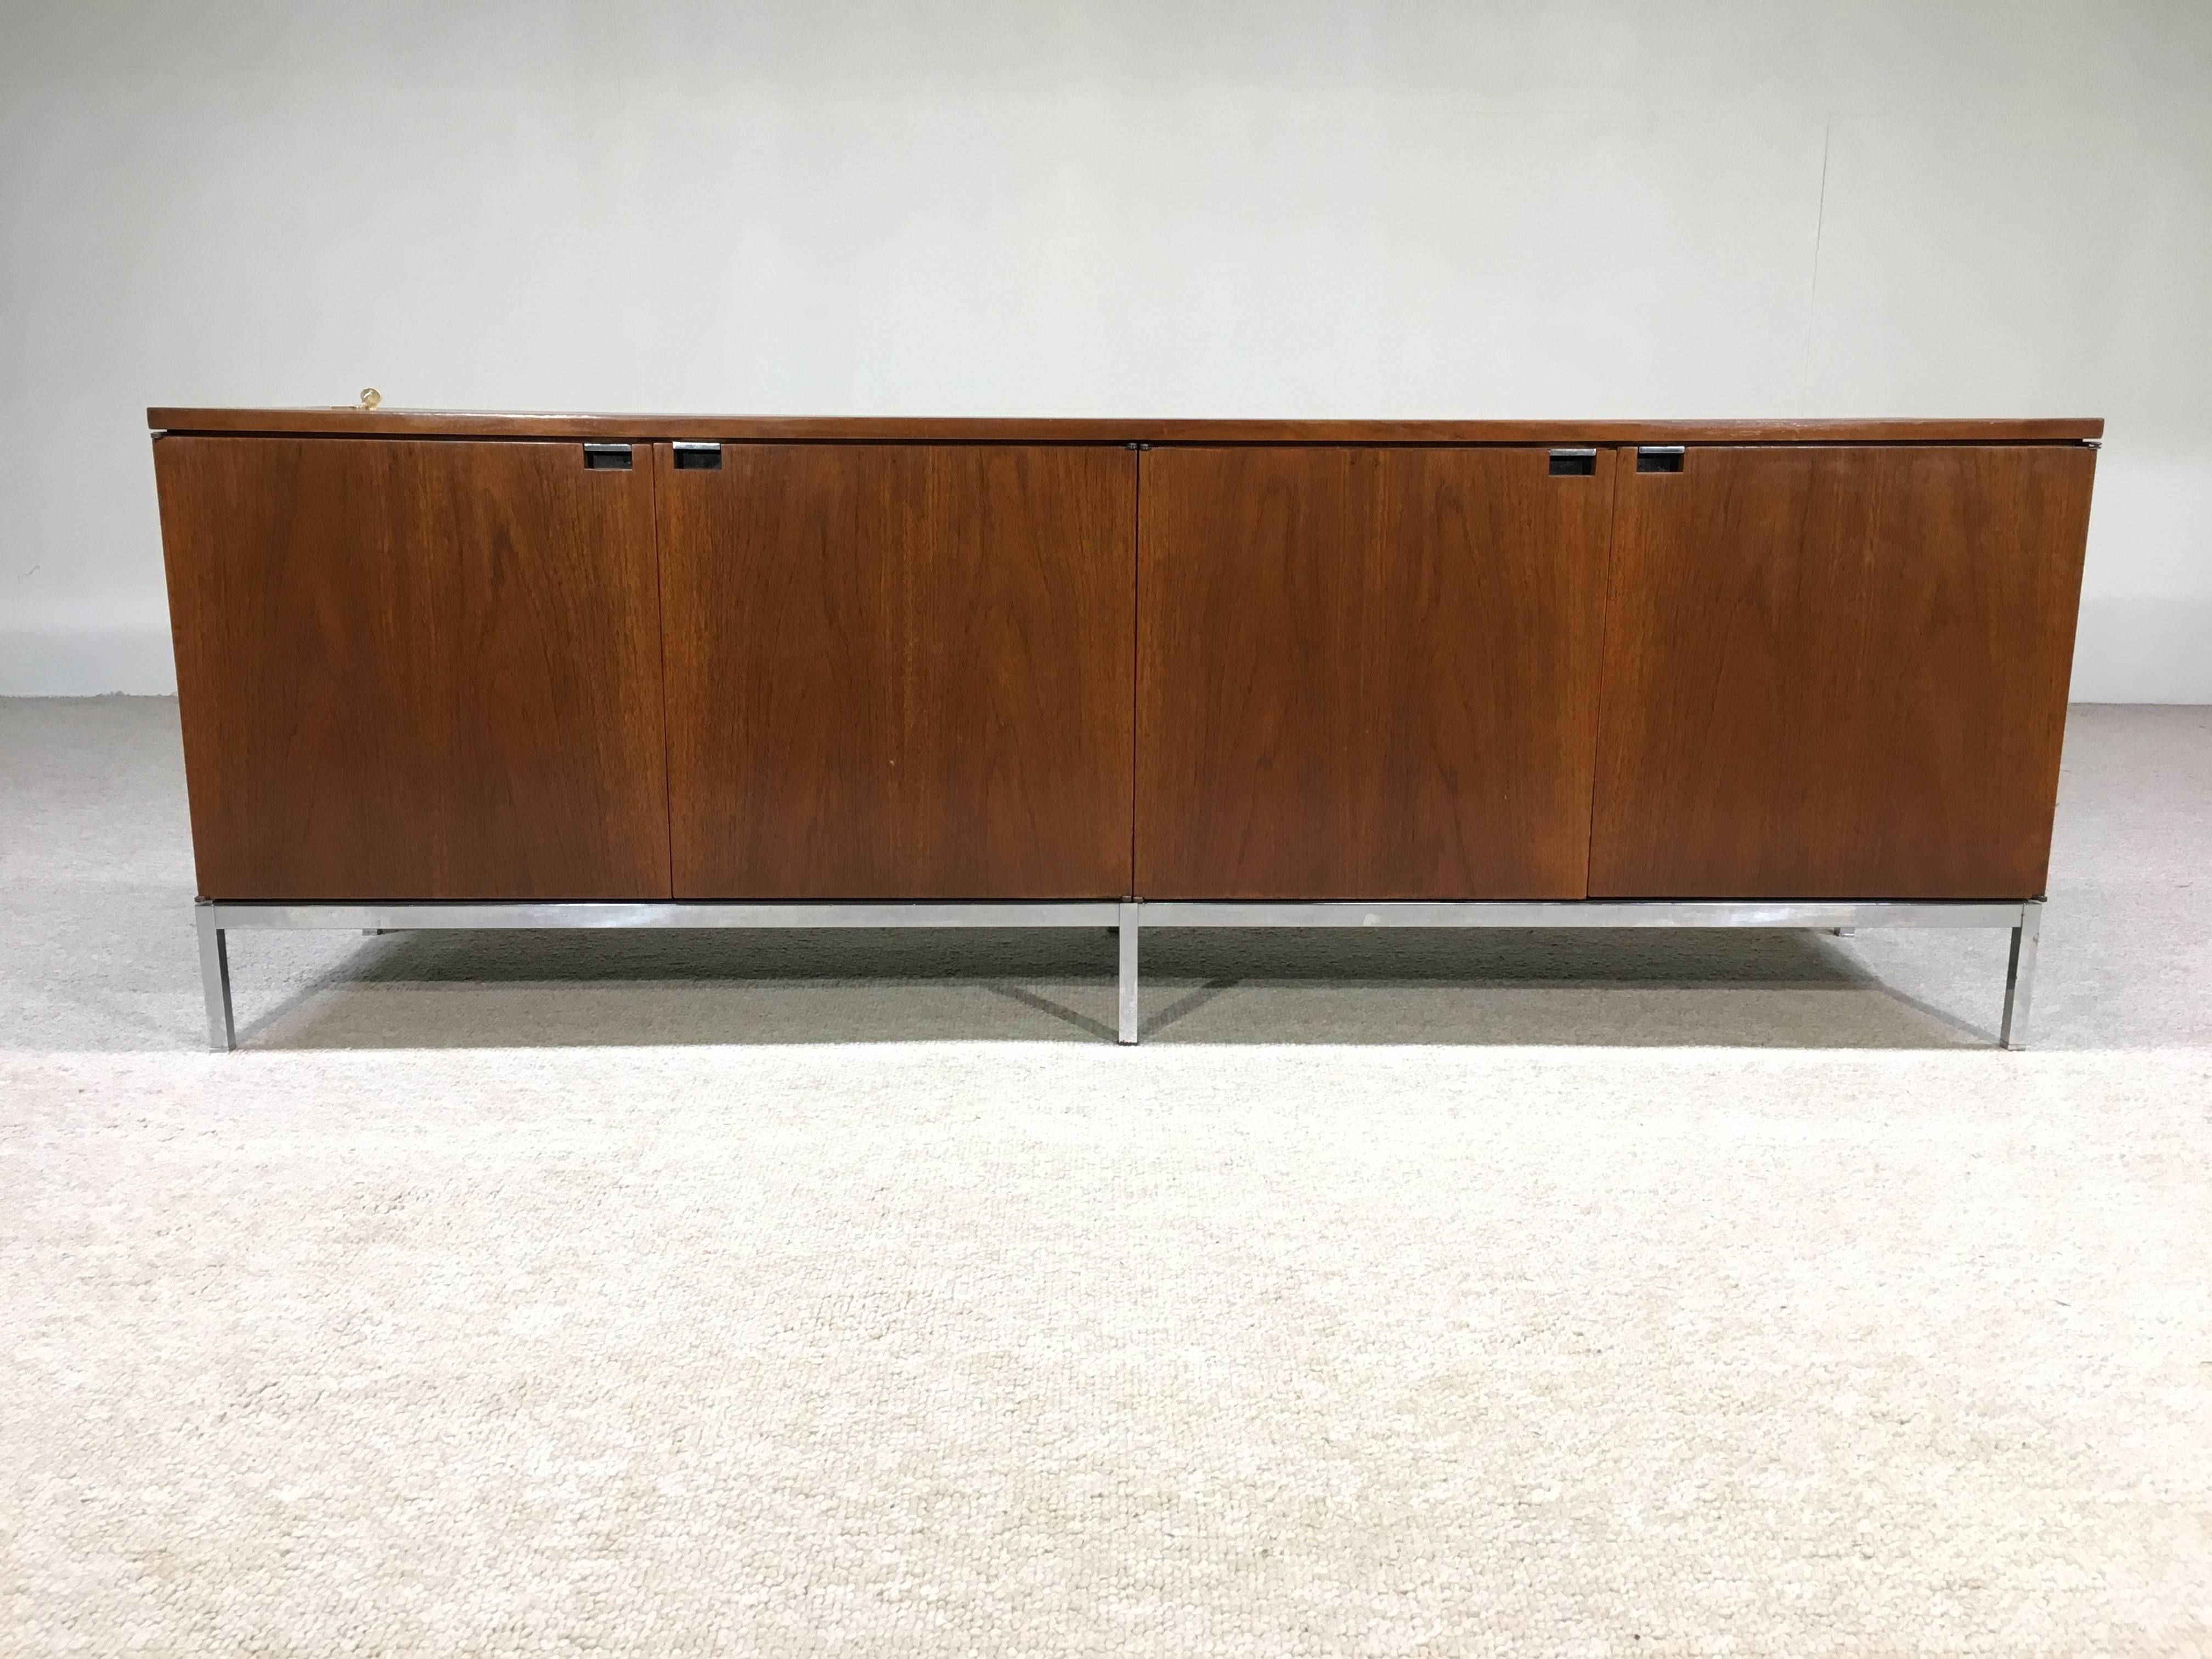 Early Florence Knoll walnut credenza with flush mount pulls. Keys for lock included! Very nice vintage condition.